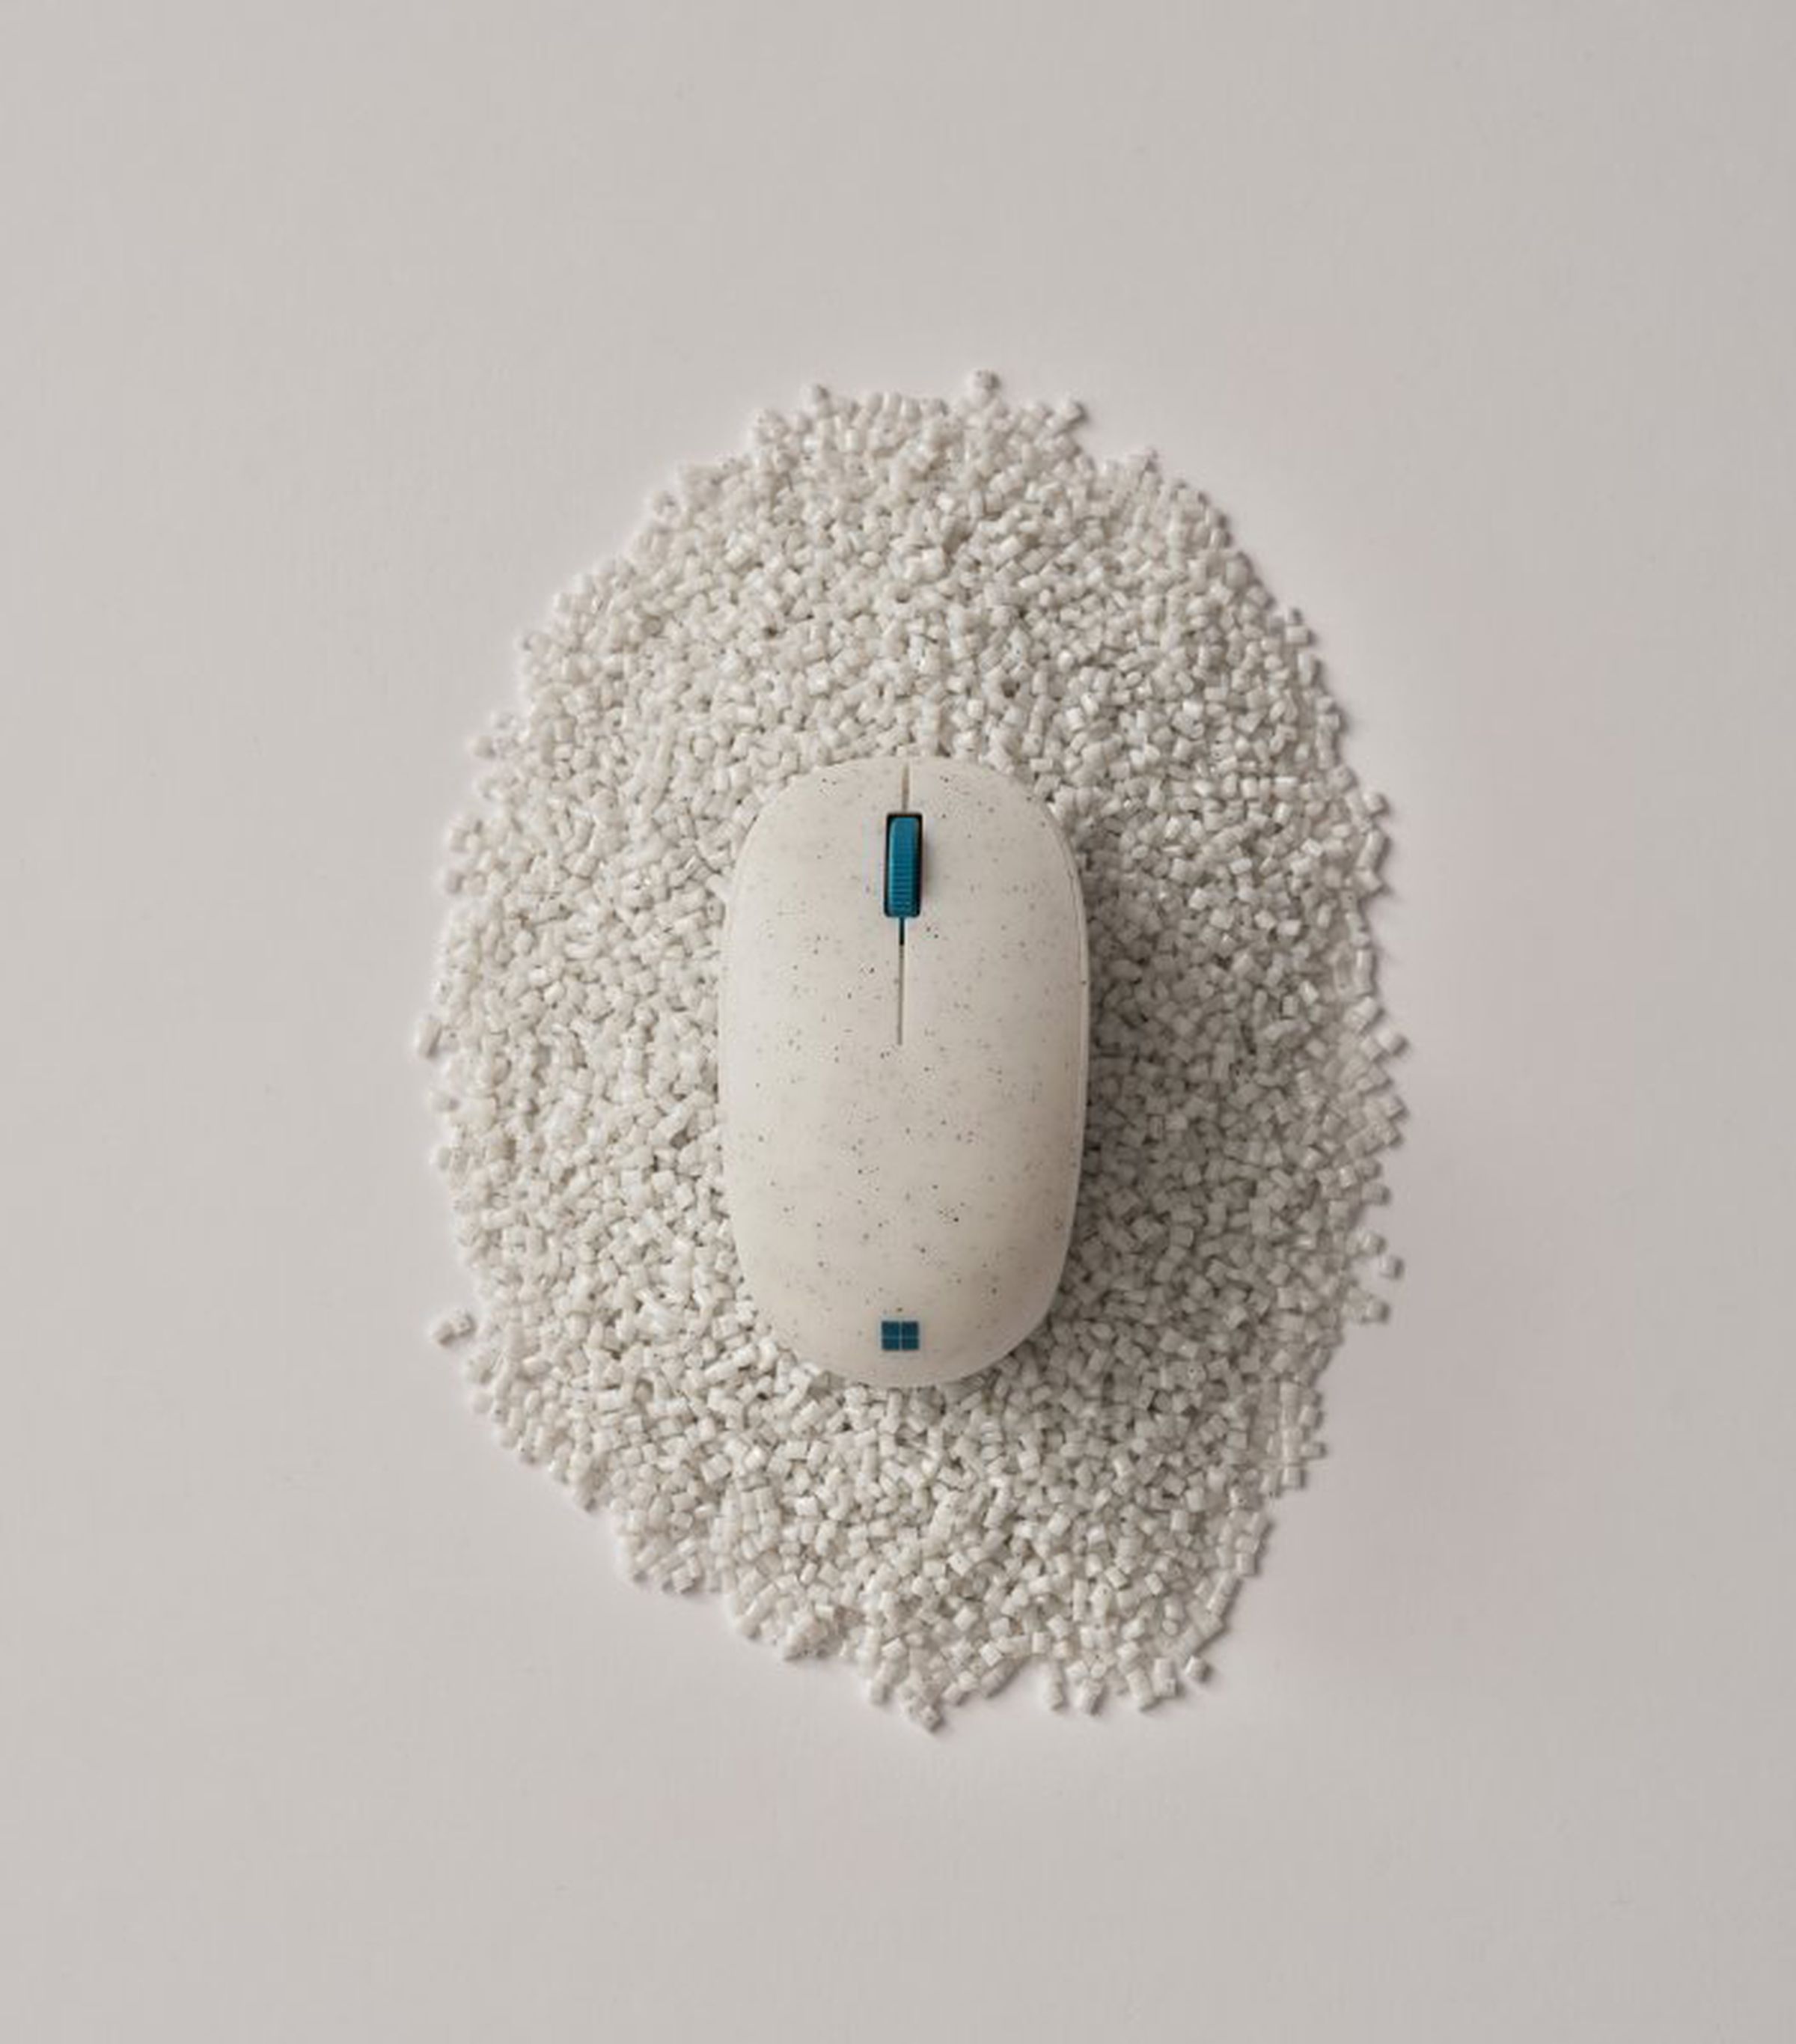 Ocean Plastic Mouse and recycled plastic pellets